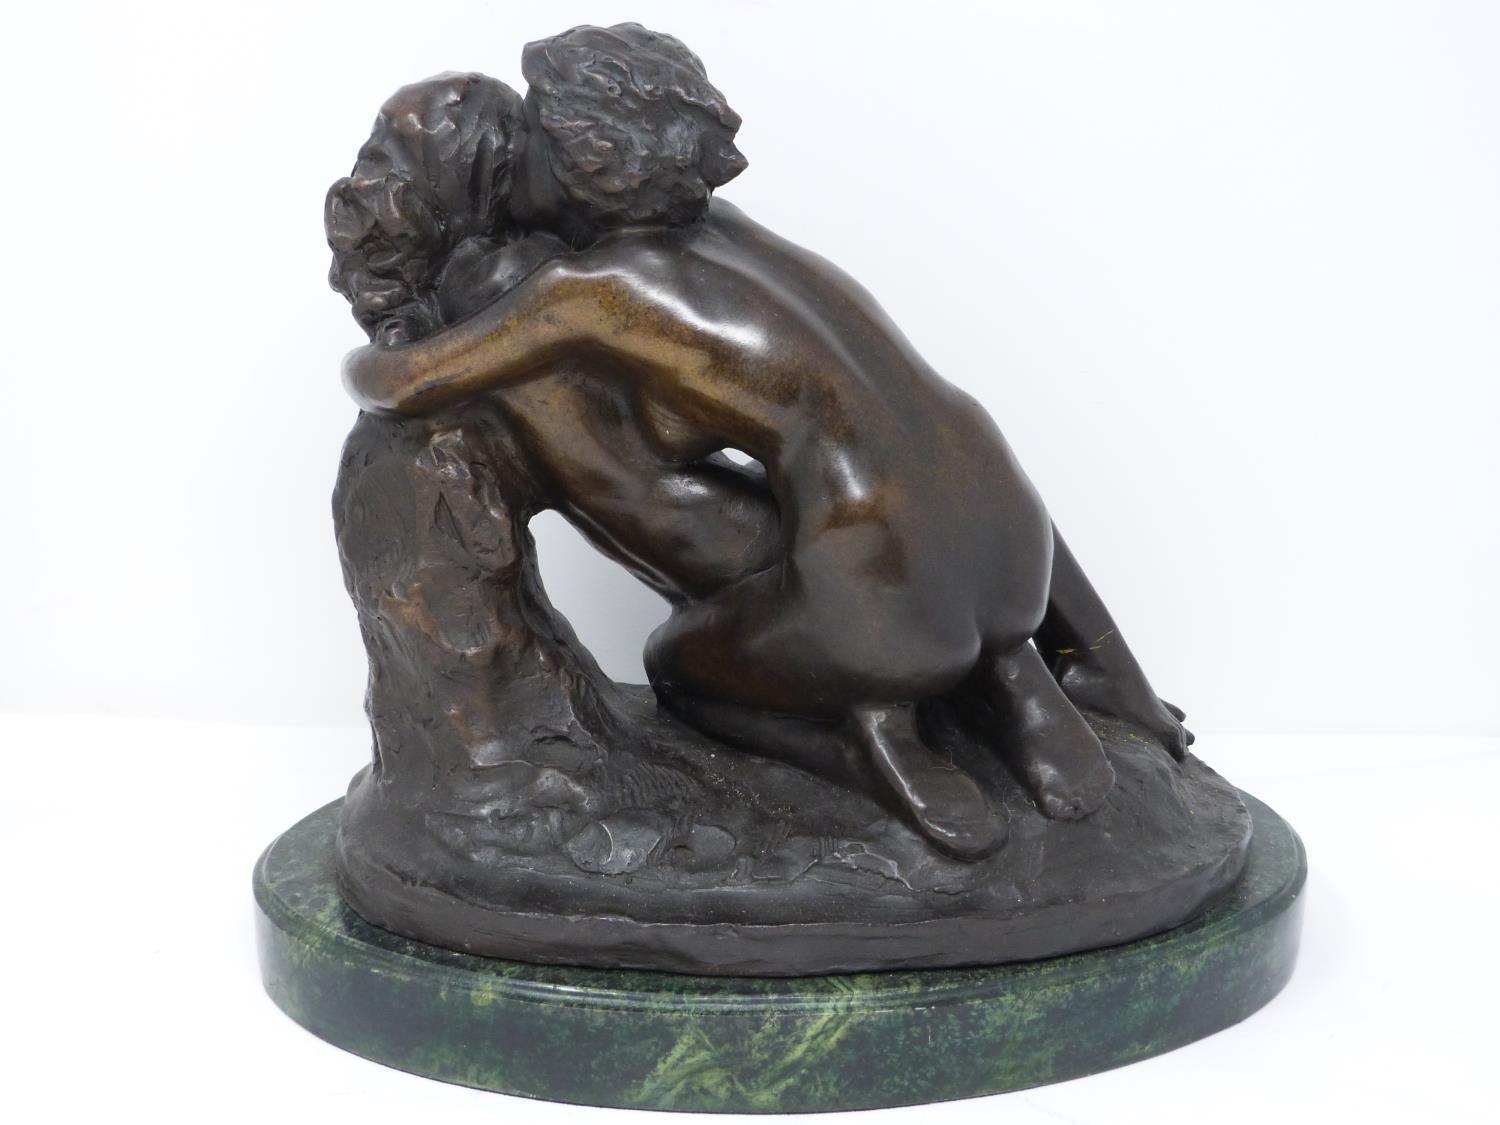 A bronze sculpture after Rodin's 'The Metamorphosis of Ovid' mounted on a green serpentine base. - Image 5 of 7